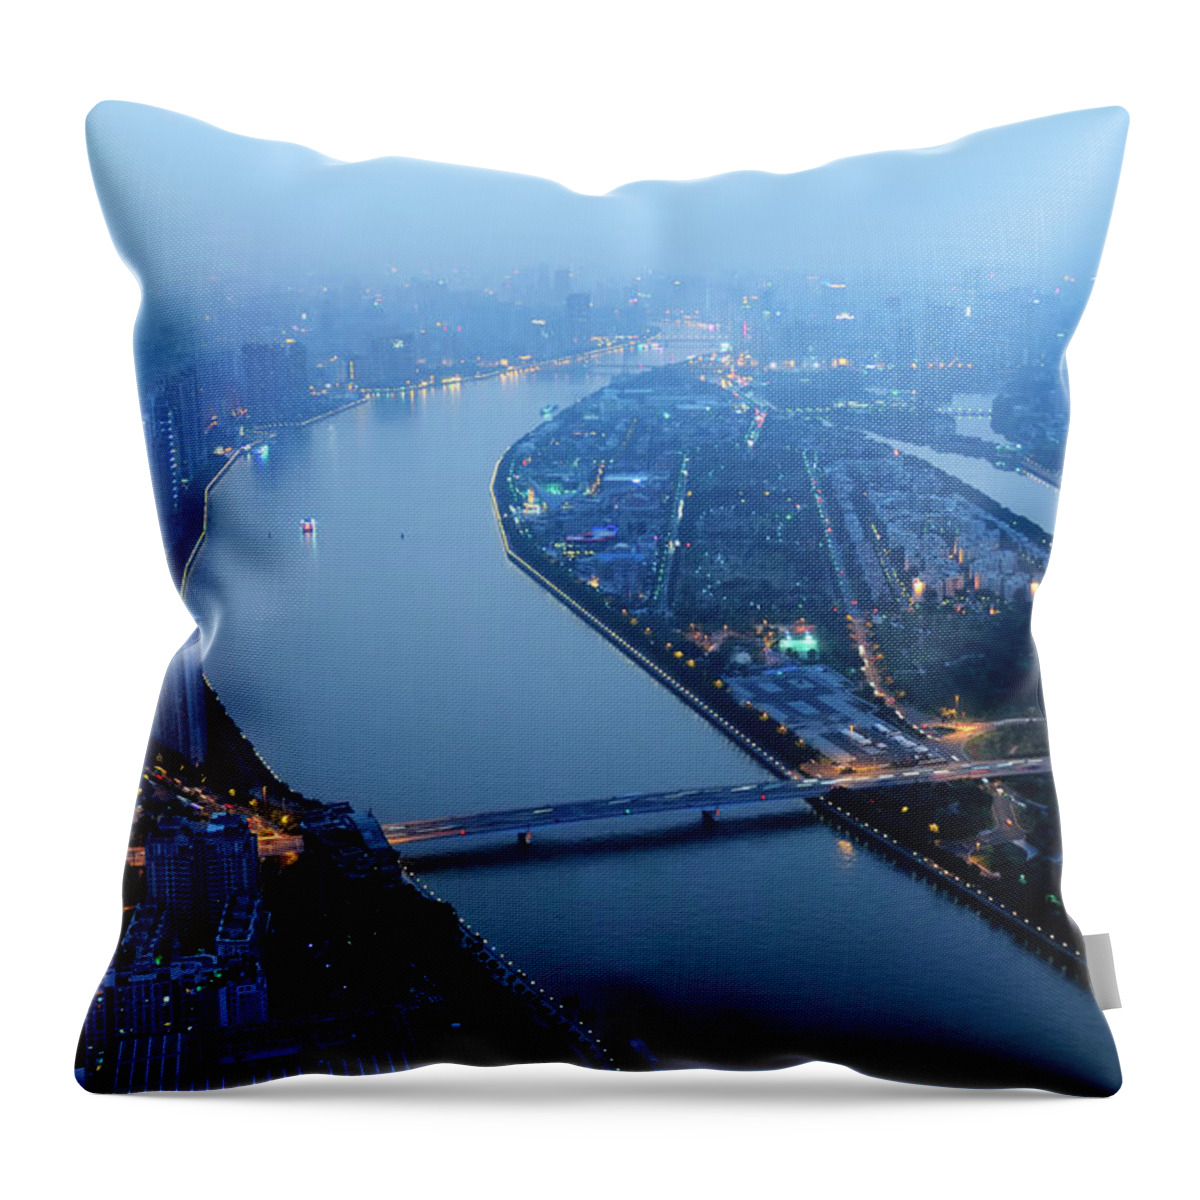 Chinese Culture Throw Pillow featuring the photograph Dusk At Guangzhou by Fmajor